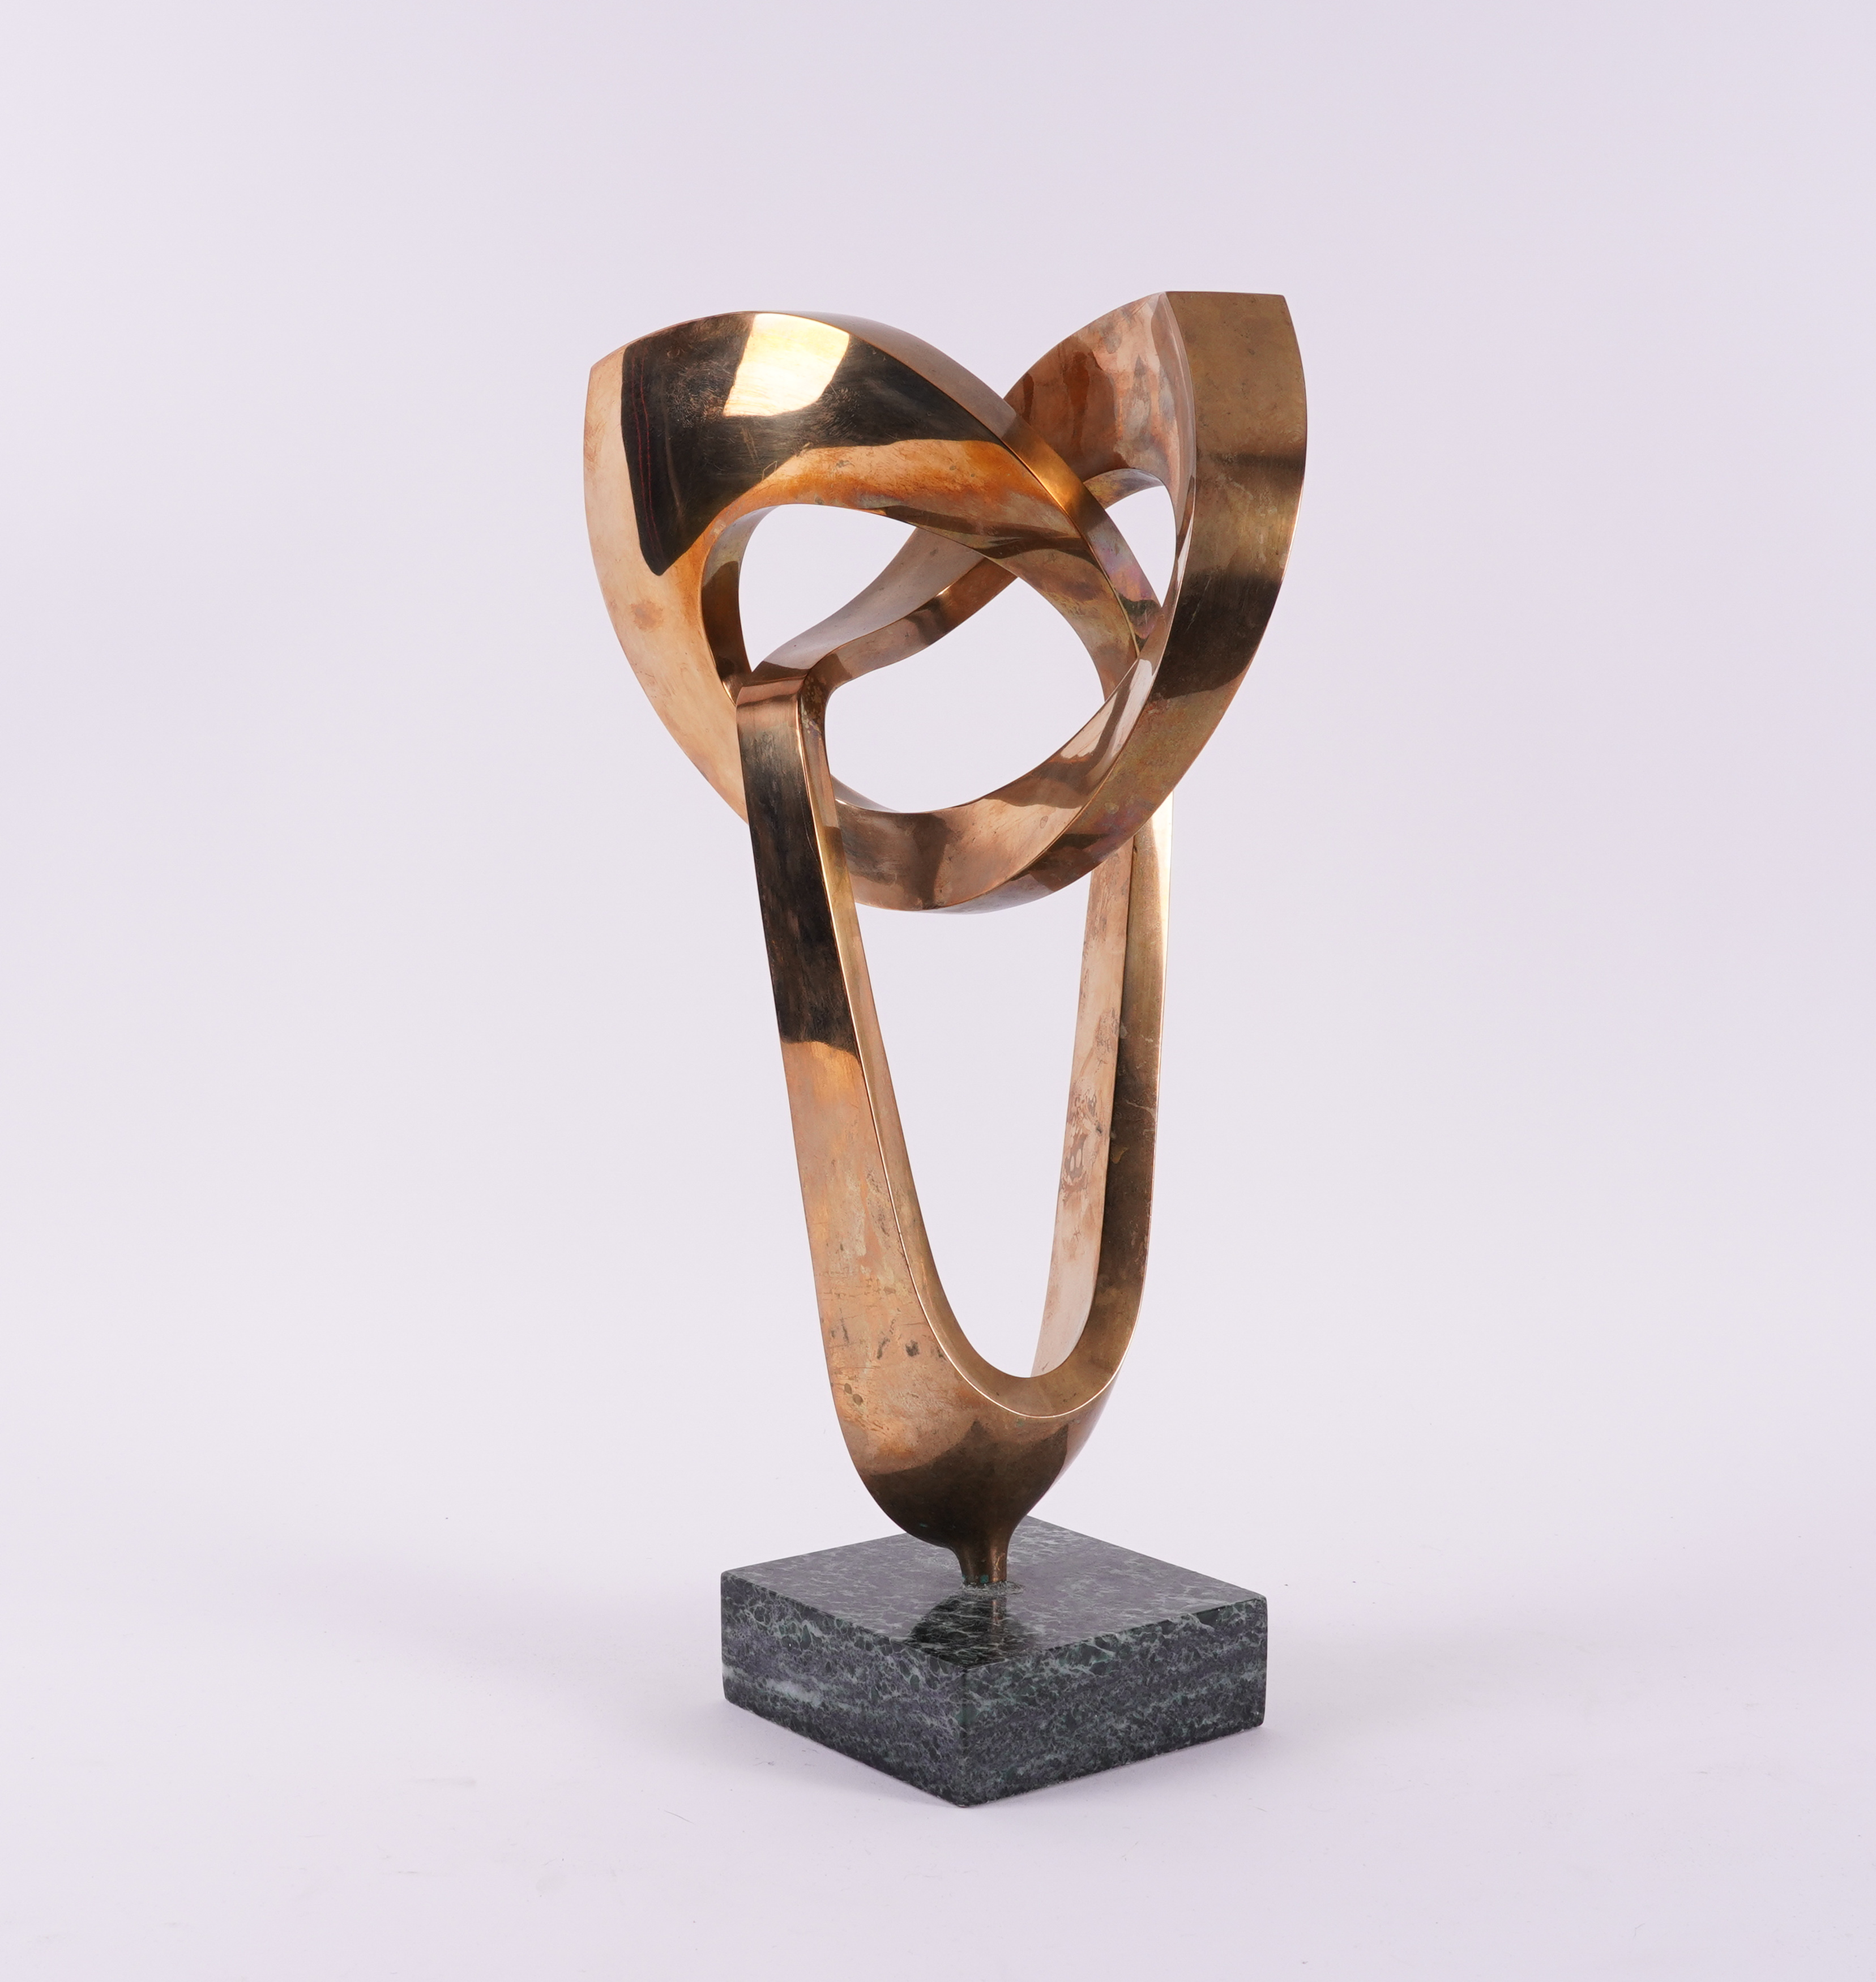 A MODERNIST POLISHED BRASS TWISTED SCULPTURE - Image 2 of 5